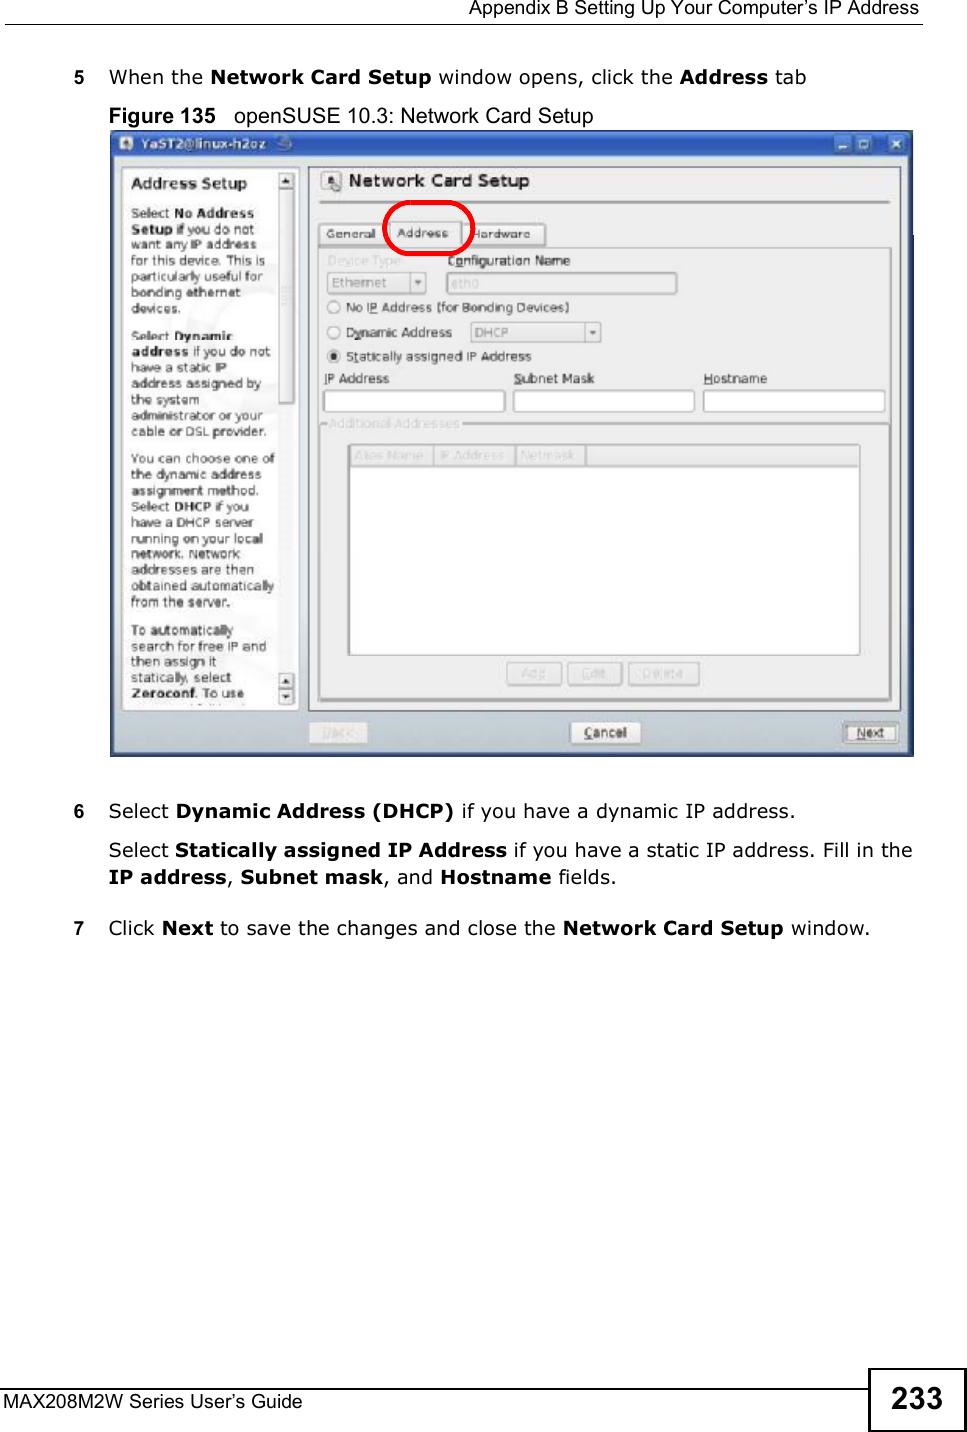  Appendix BSetting Up Your Computer s IP AddressMAX208M2W Series User s Guide 2335When the Network Card Setup window opens, click the Address tabFigure 135   openSUSE 10.3: Network Card Setup6Select Dynamic Address (DHCP) if you have a dynamic IP address.Select Statically assigned IP Address if you have a static IP address. Fill in the IP address, Subnet mask, and Hostname fields.7Click Next to save the changes and close the Network Card Setup window. 